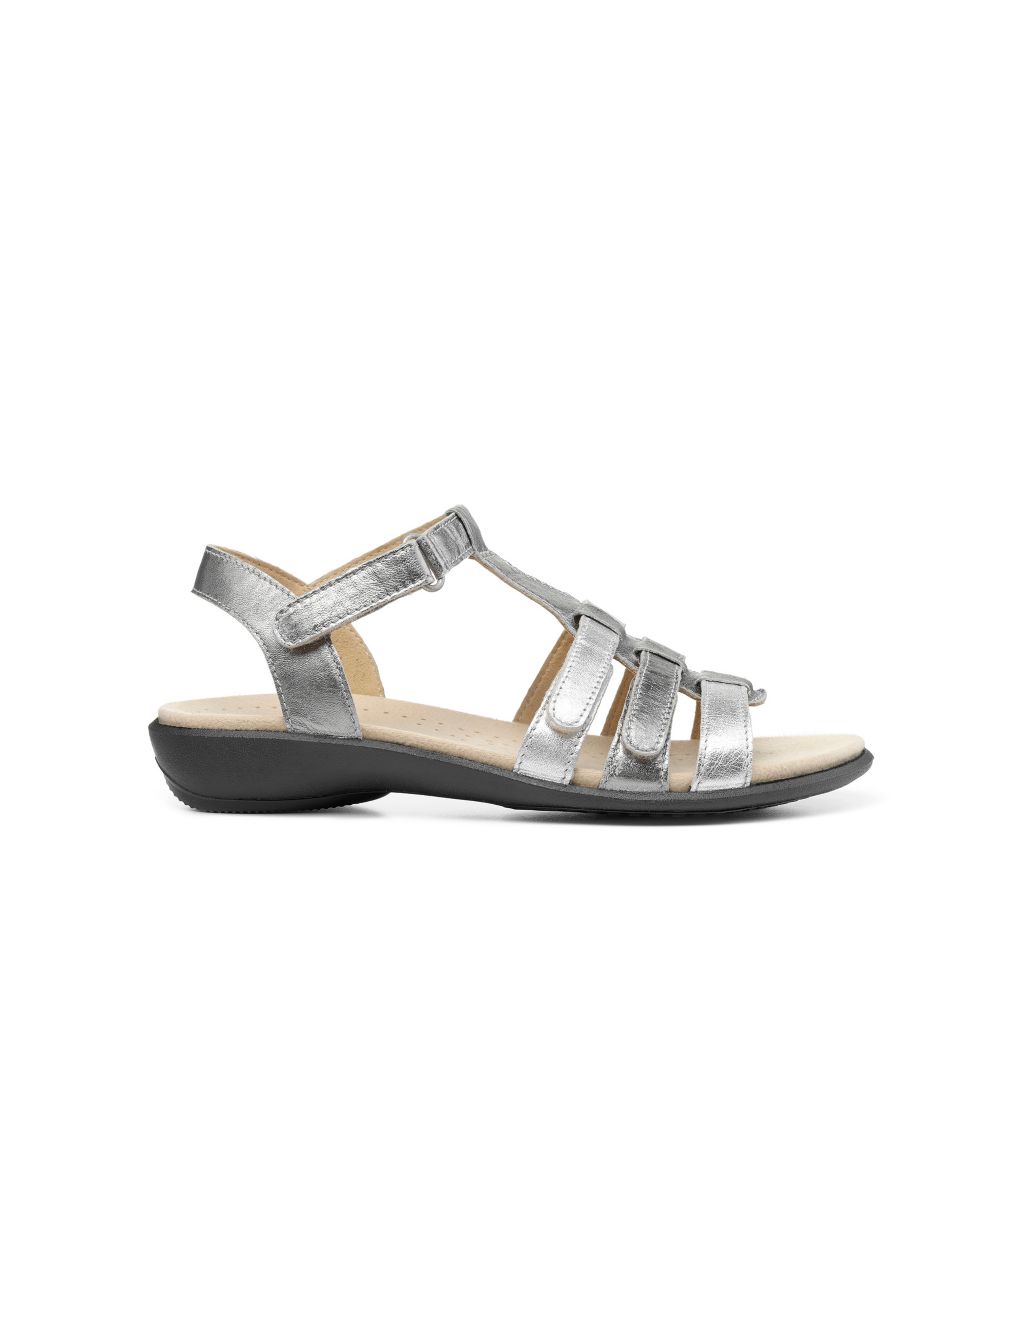 Sol Wide Fit Leather Metallic Sandals image 1